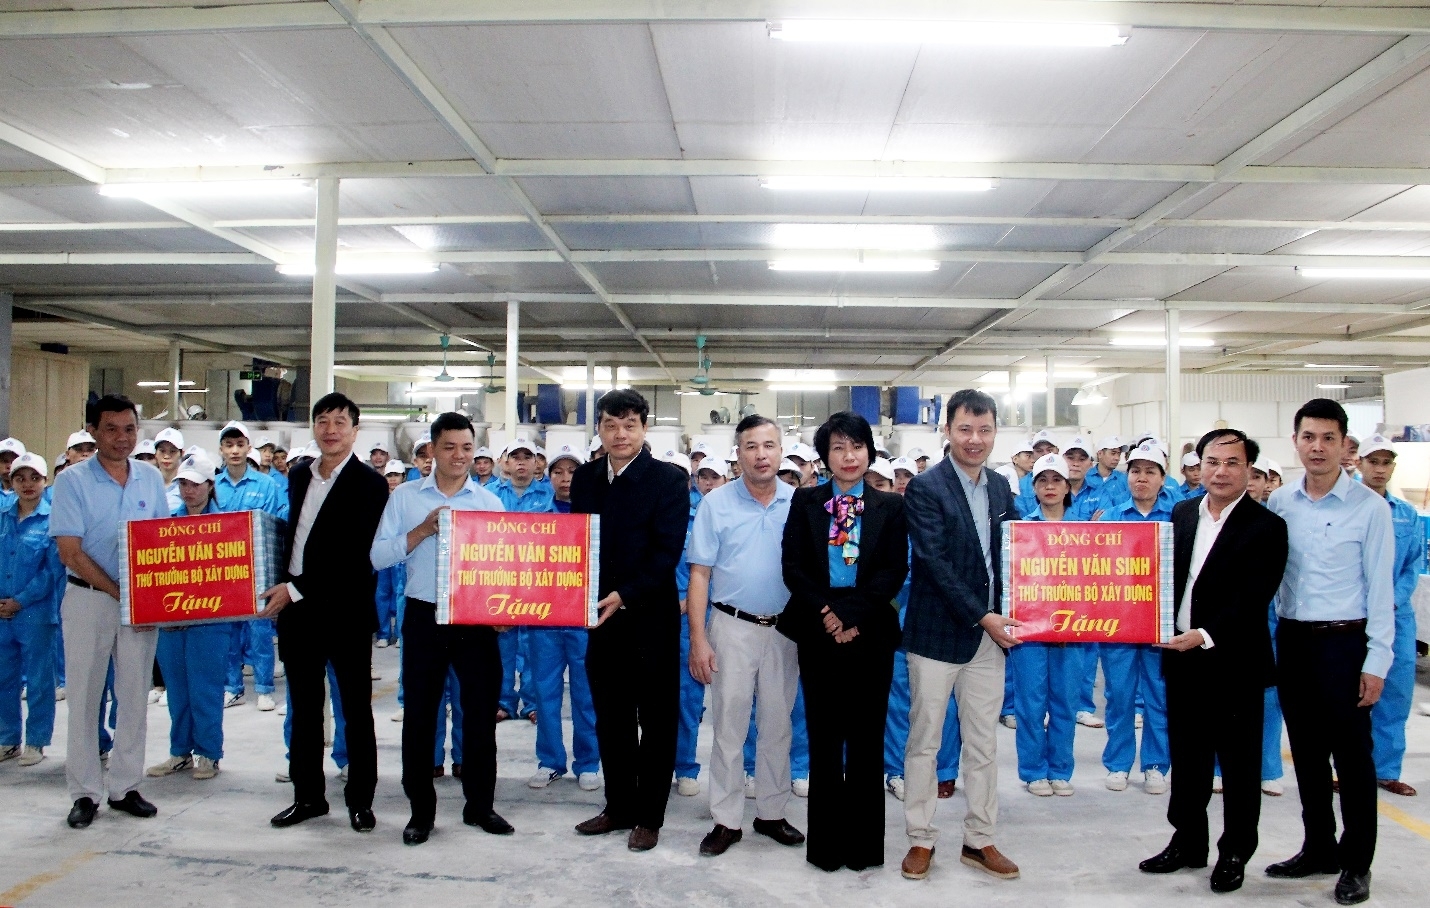 Deputy Minister Nguyen Van Sinh and Construction Trade Union visites and offers gifts to its employees